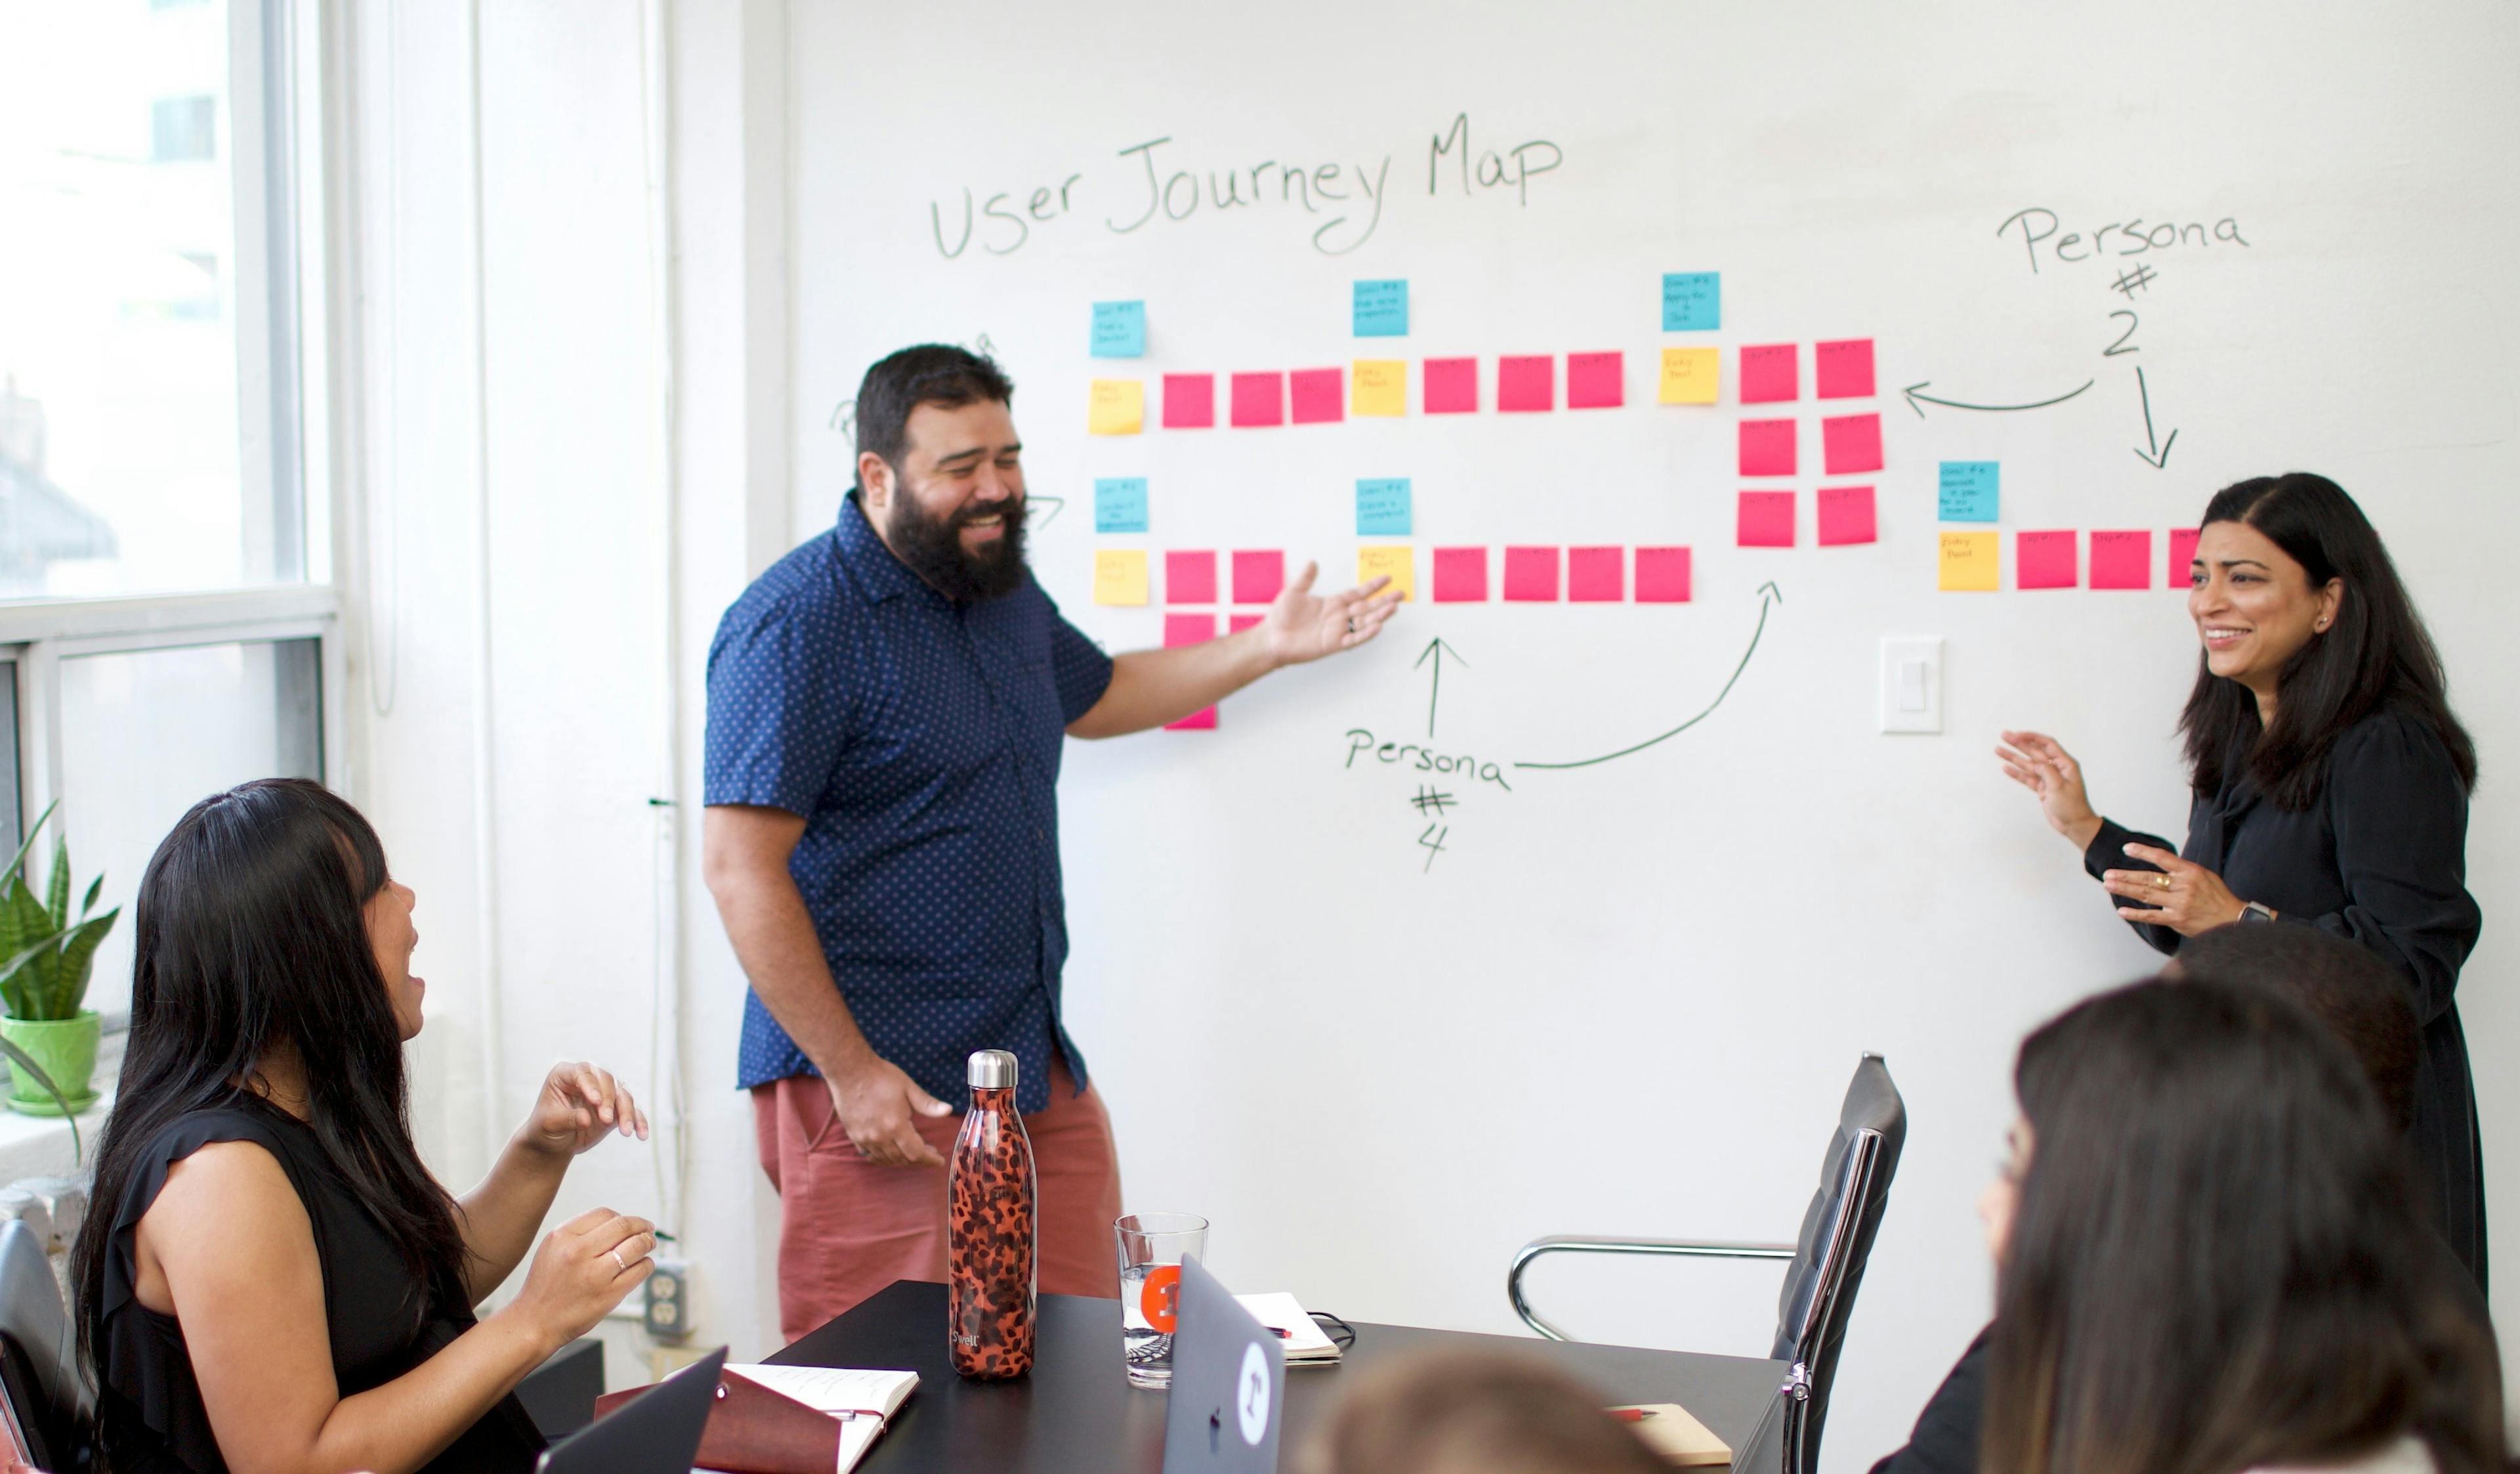 People are gathered in a conference room. A man is standing at a white board gesturing towards sticky notes under the words "User Journey Map." A woman is also standing at the white board, smiling, and gesturing towards the board.